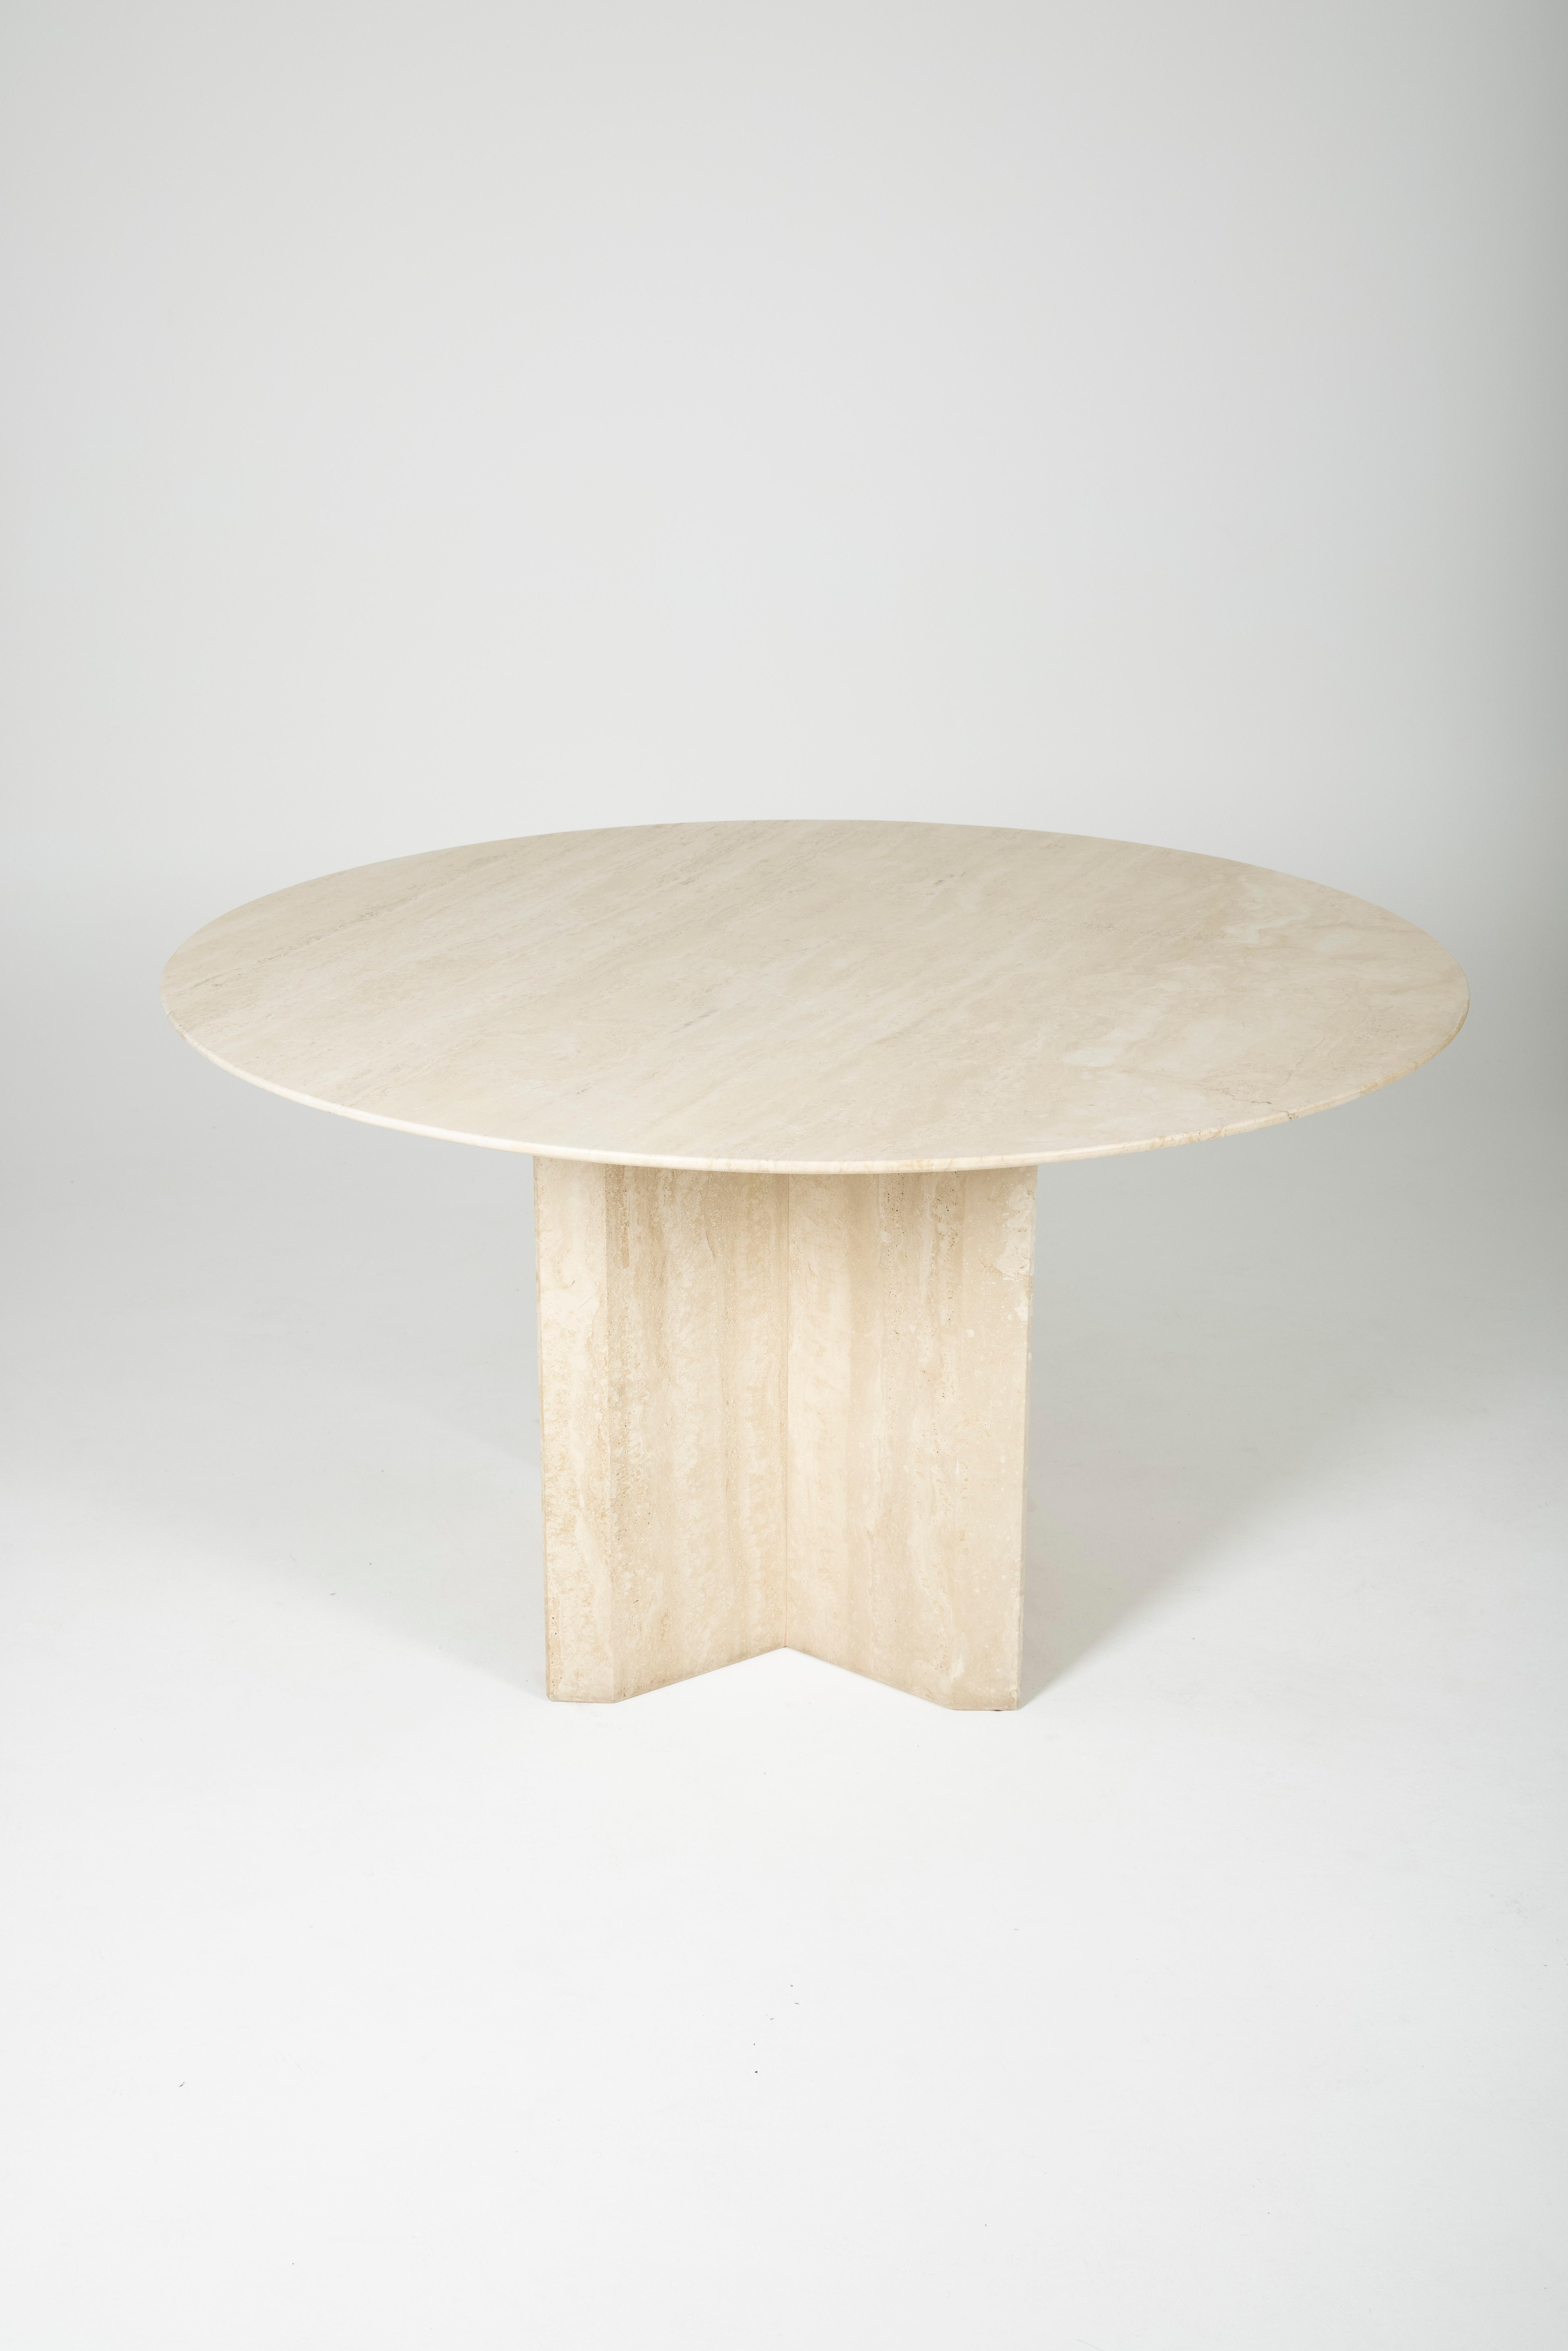 Round dining room table in travertine. The top rests on two removable feet. Very good condition.